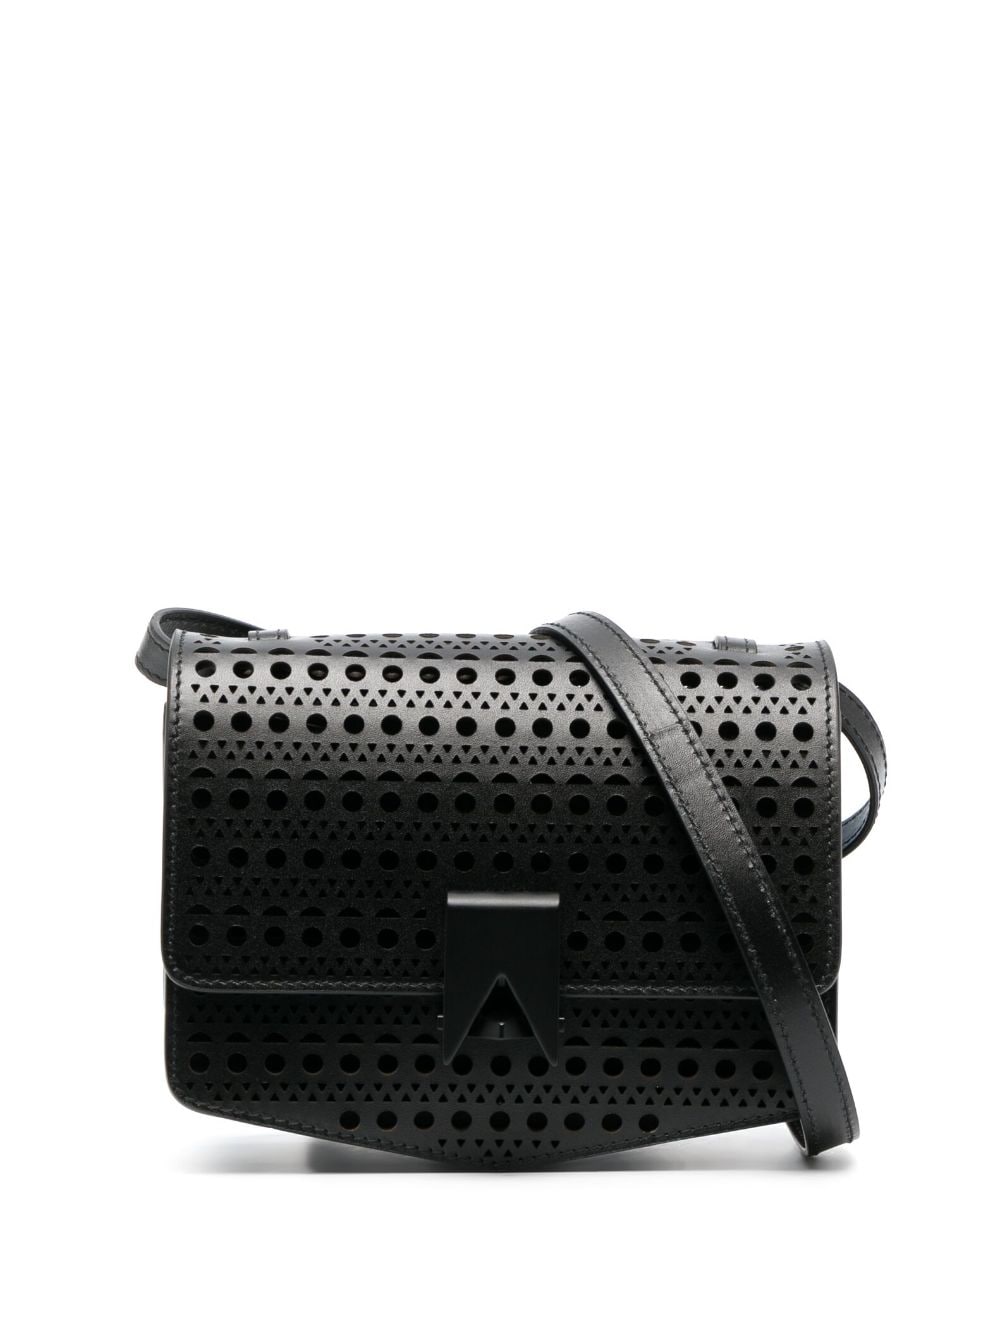 ALAIA Black Perforated Crossbody Shoulder Bag for Women - FW23 Collection